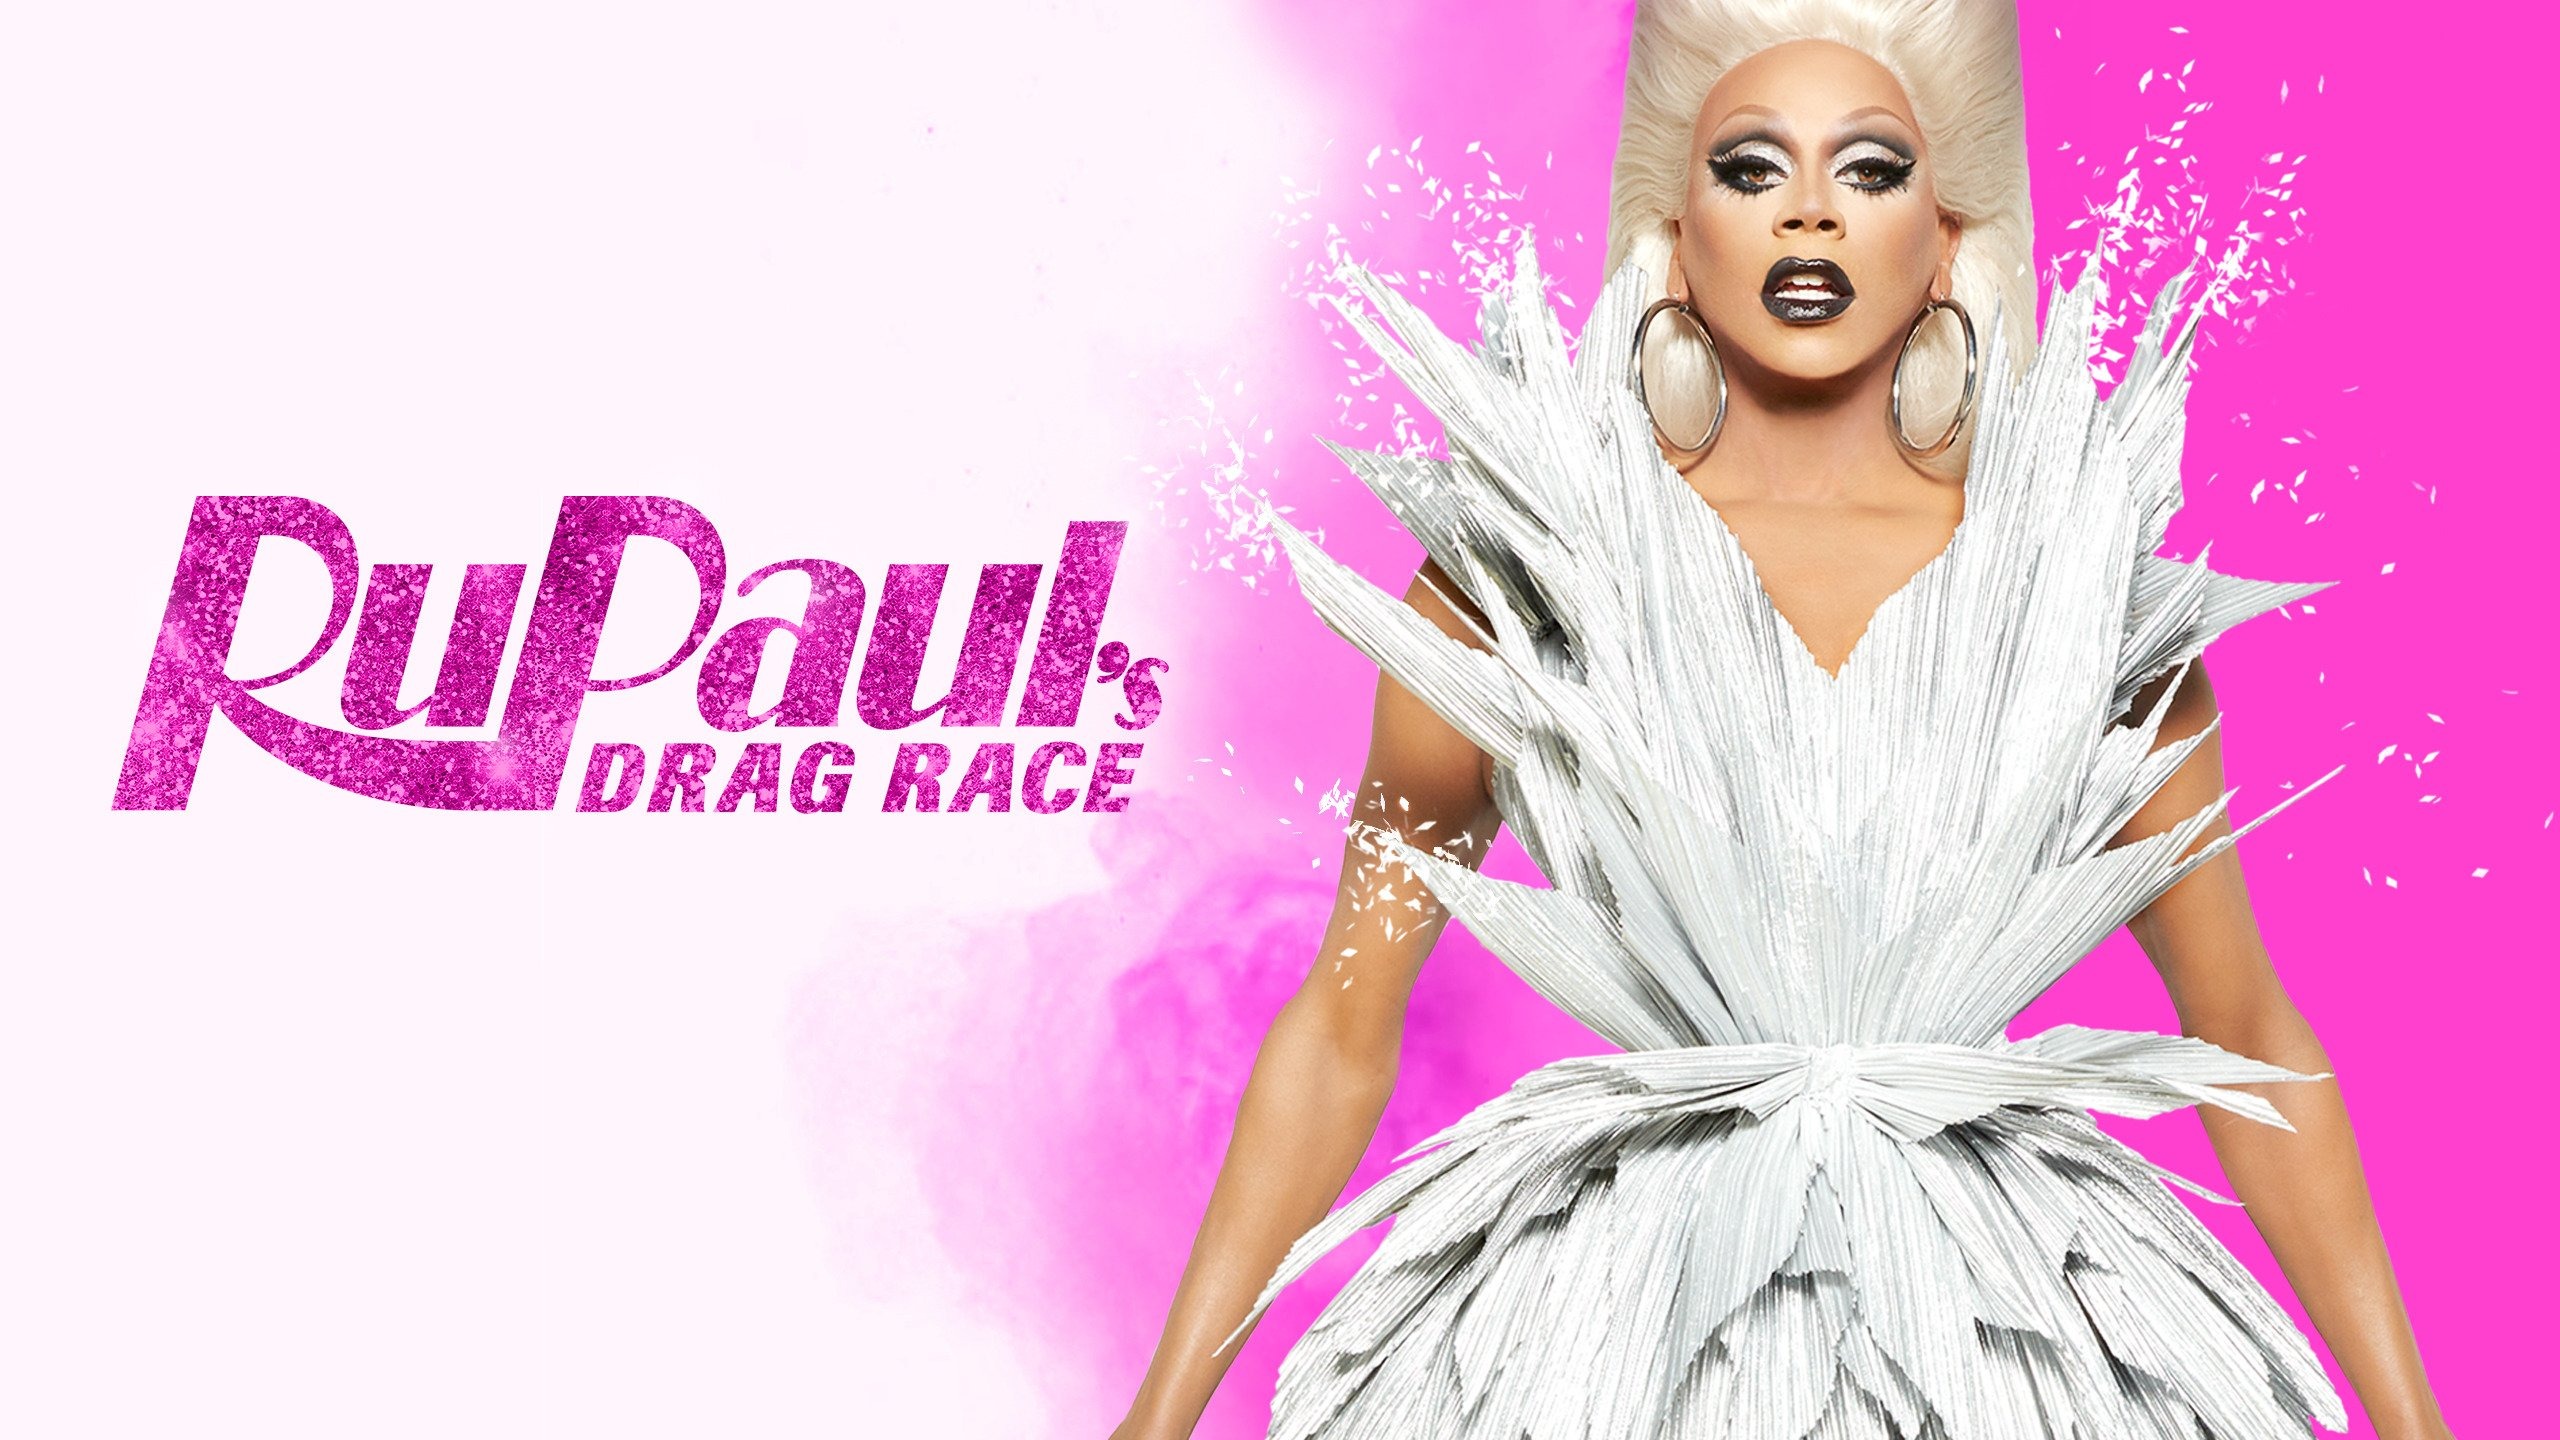 RuPaul's Drag Race is an American reality competition television series produced by World of Wonder for Logo TV and, beginning with the ninth season, ...